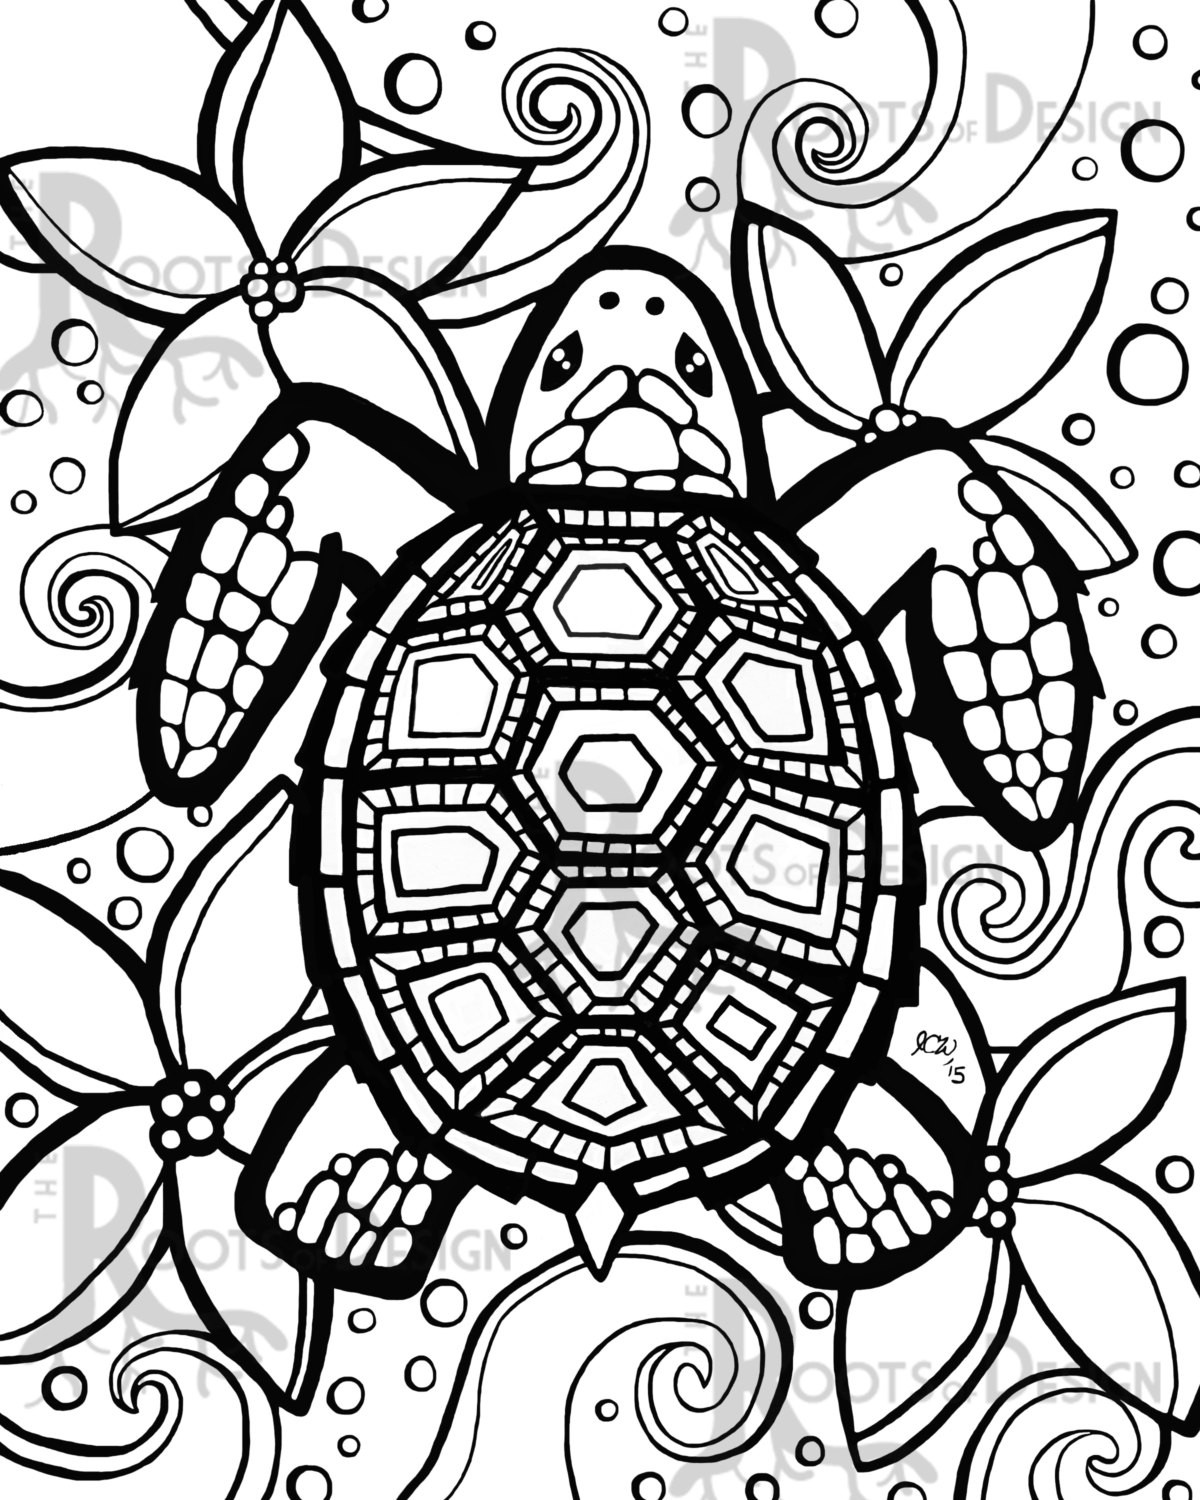 Stress Relief Coloring Pages Printable
 Free Stress Relief Coloring Pages at GetDrawings